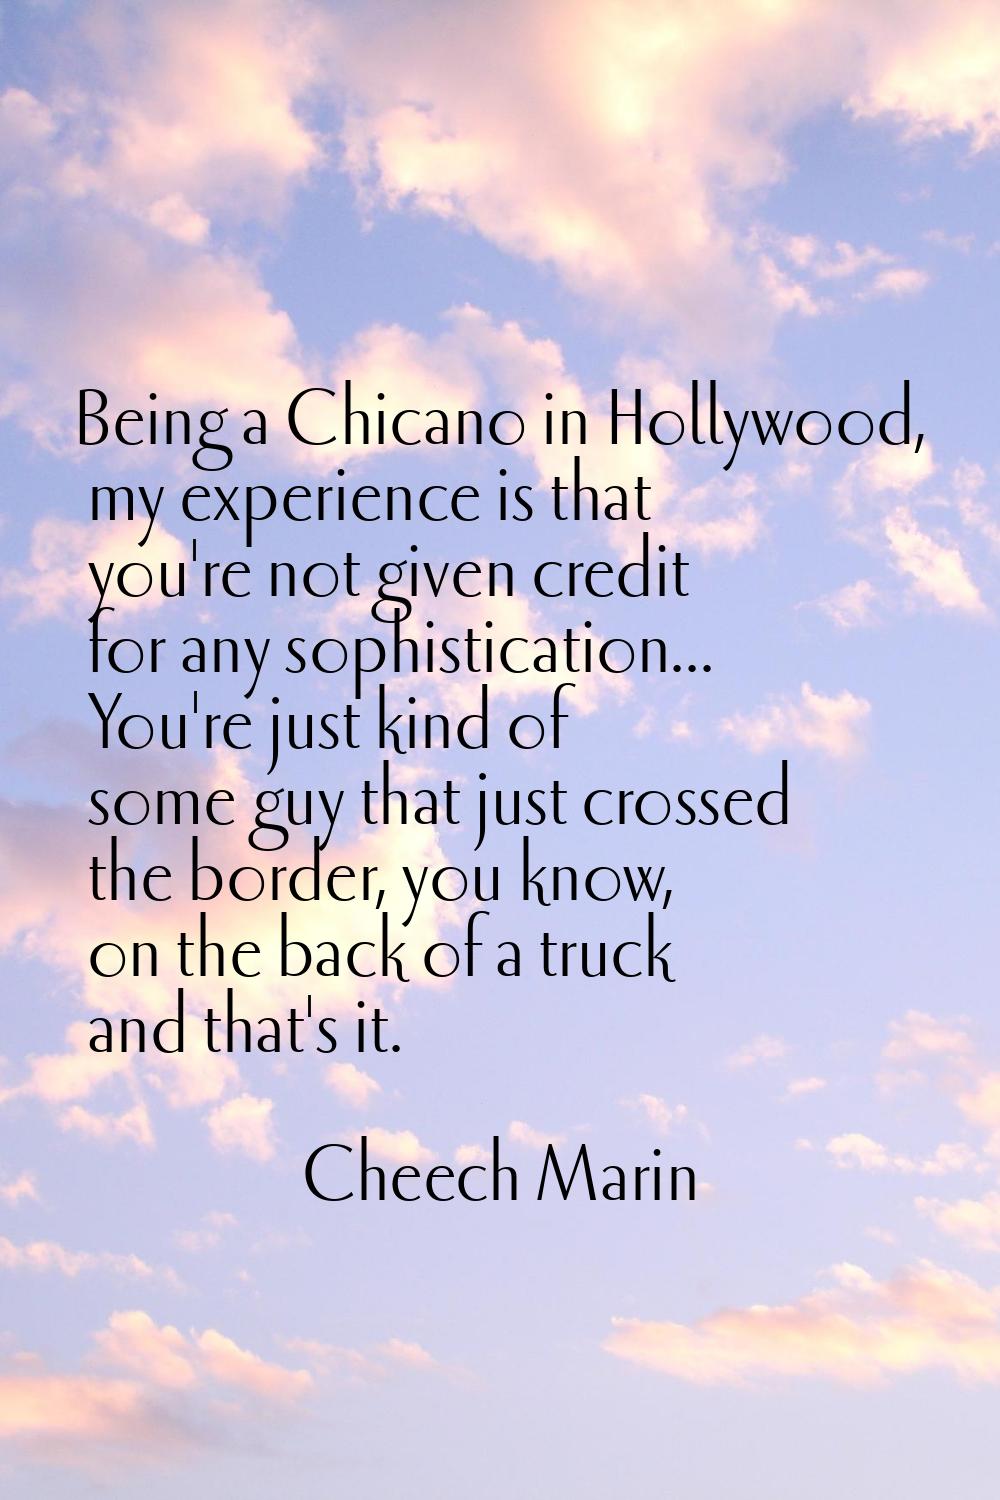 Being a Chicano in Hollywood, my experience is that you're not given credit for any sophistication.